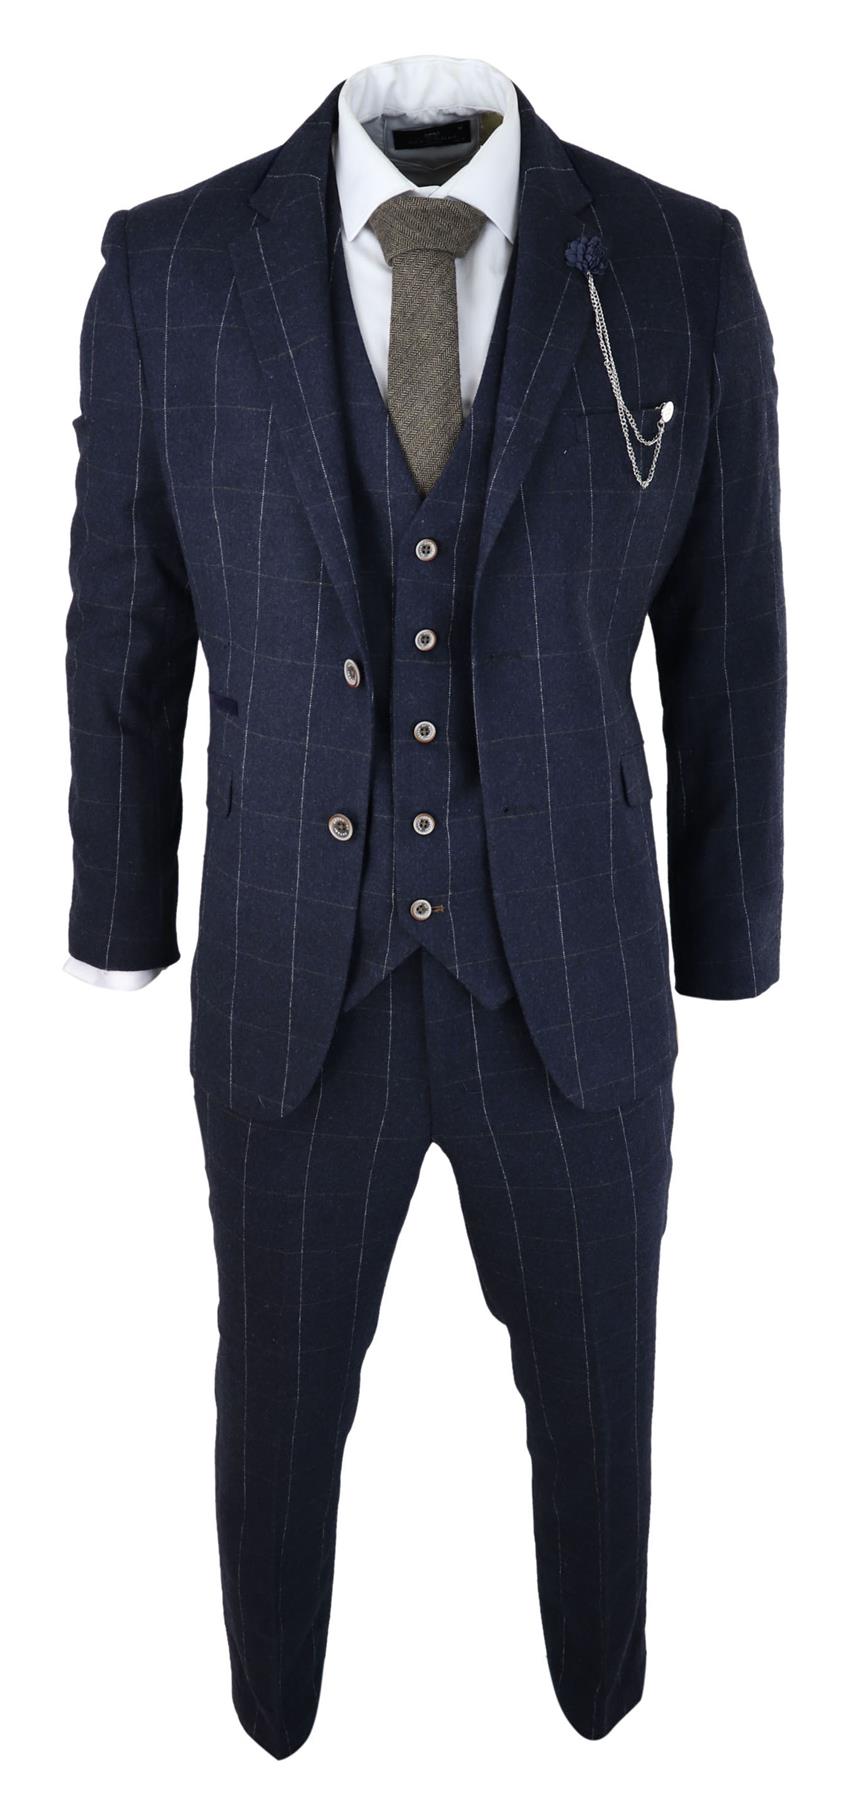 Mens 3 Piece Wool Suit Navy Blue Tweed Check Peaky Blinders 1920 Gatsby Formal - Upperclass Fashions 